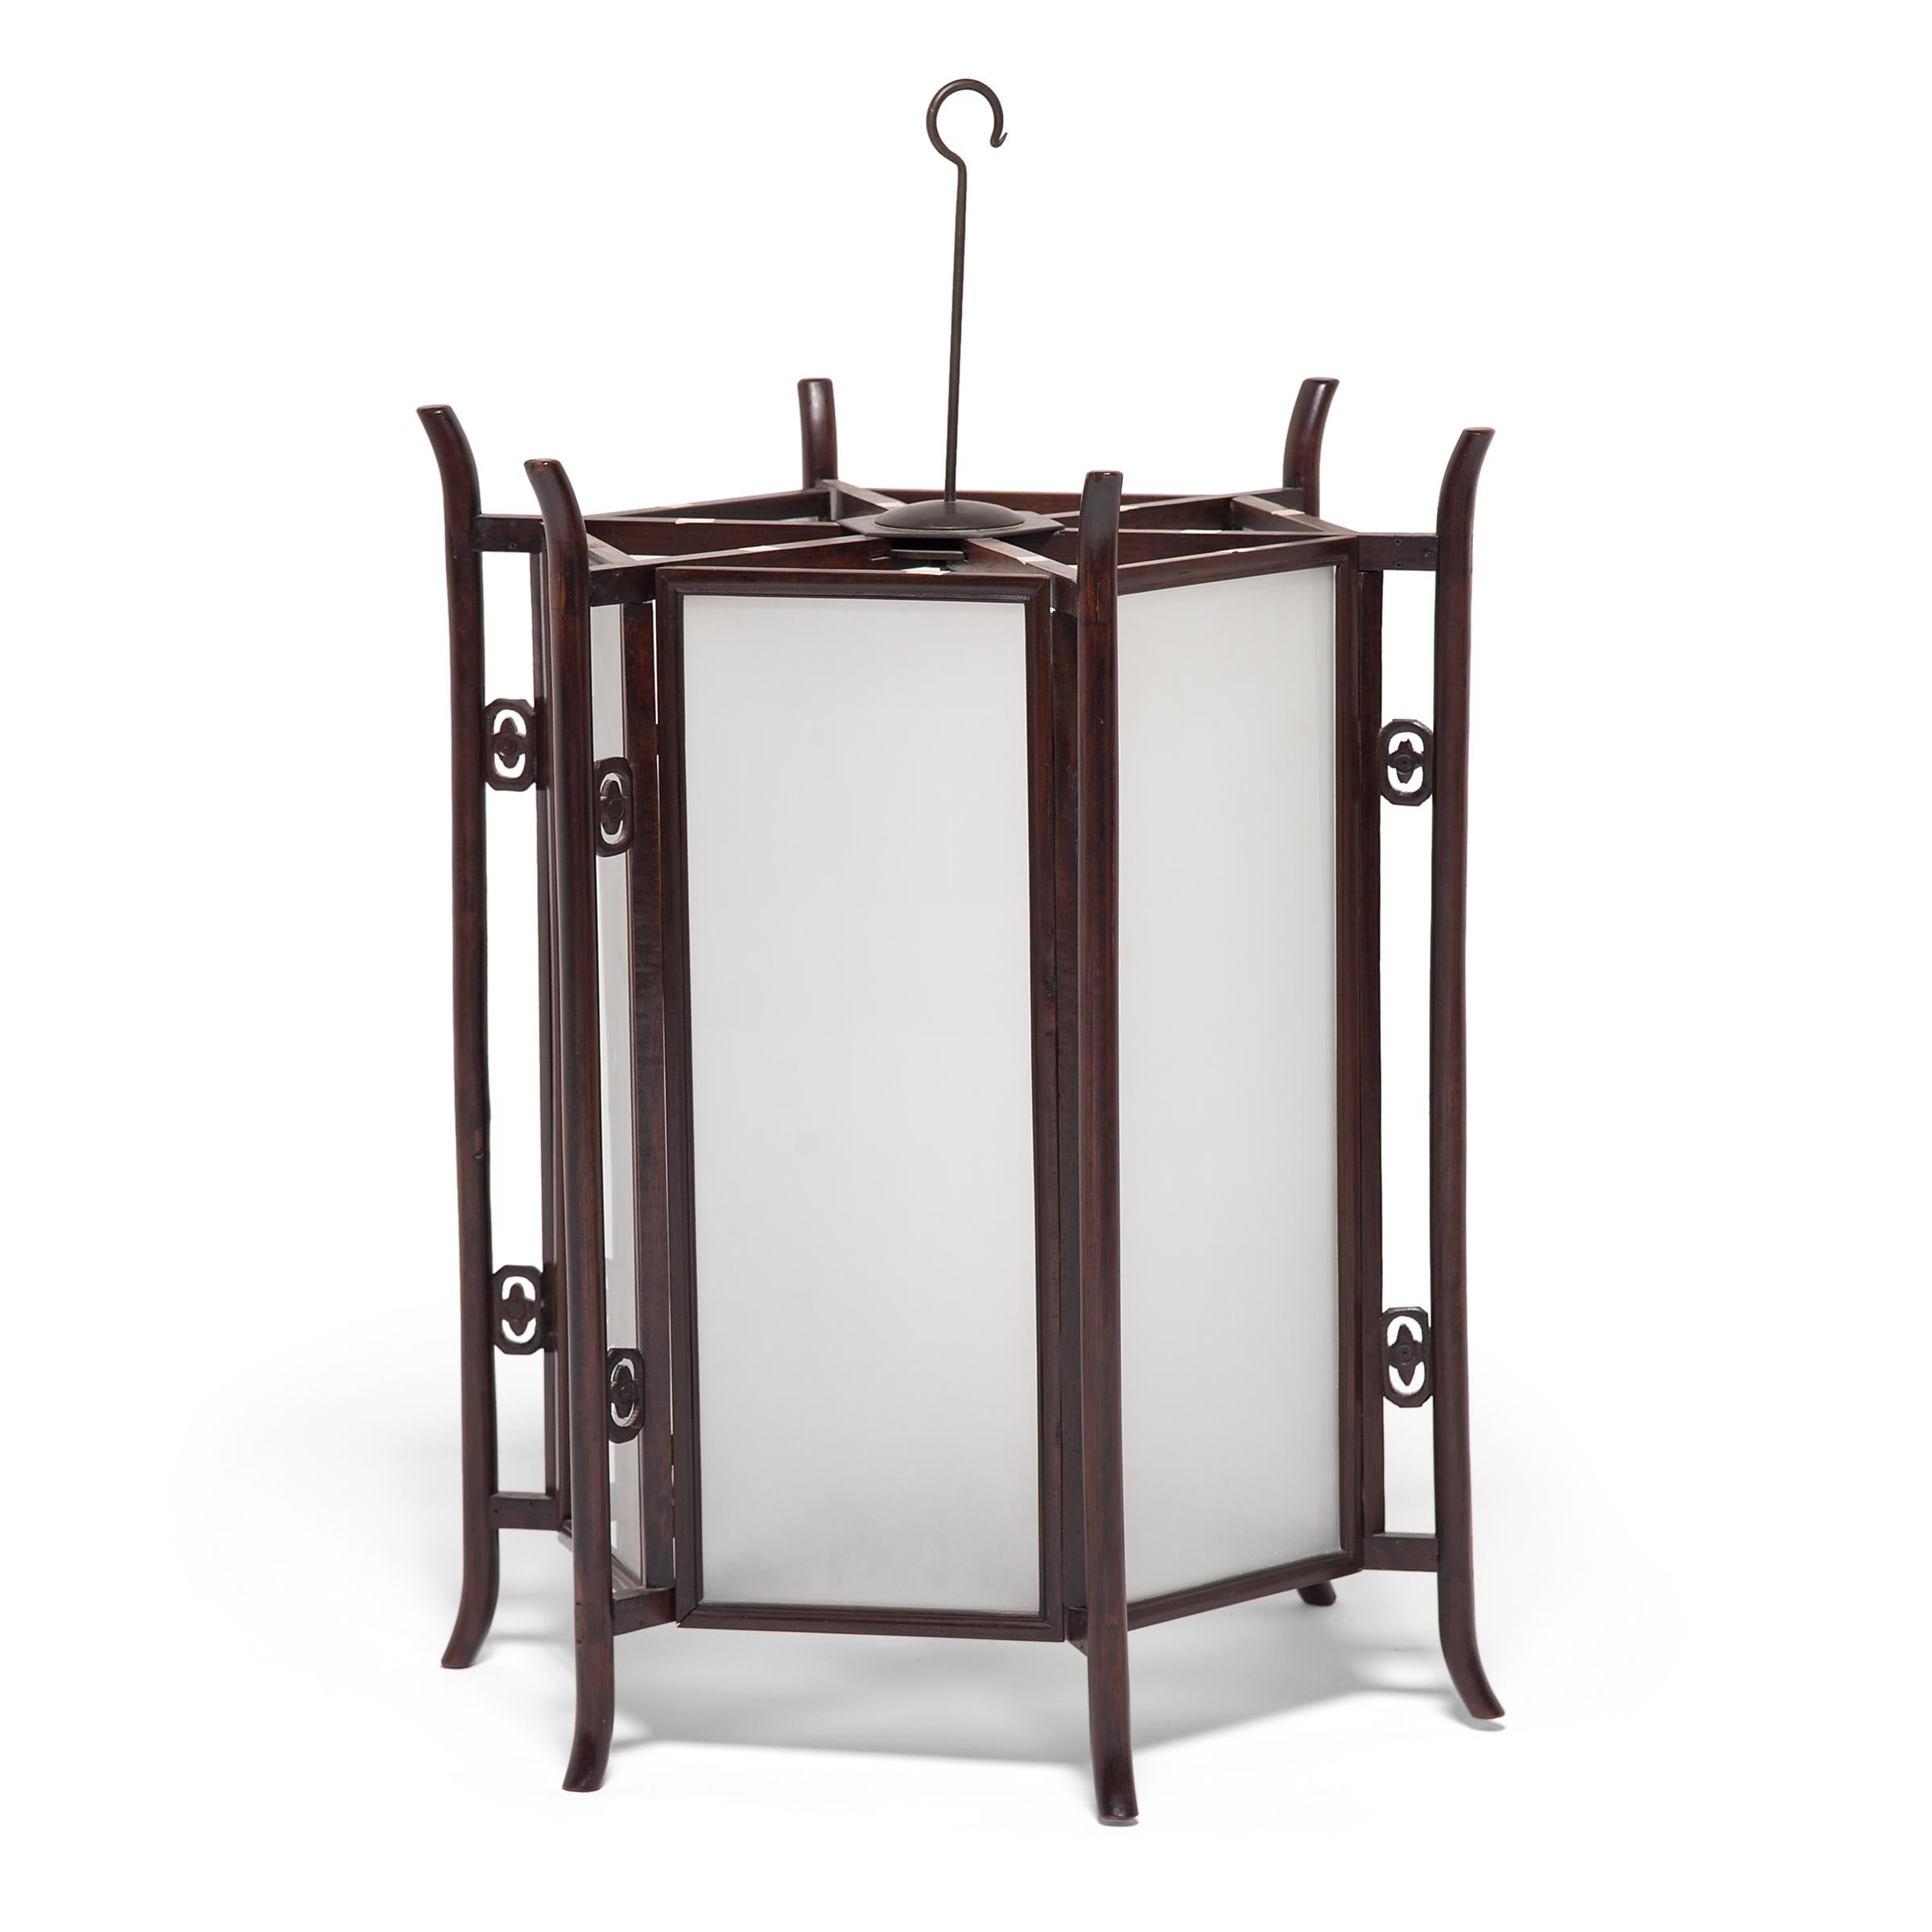 Elegantly constructed of thin pieces of fine hardwood, this ornate 19th-century lantern would have originally been lit with candles to illuminate a courtyard home in China's Anhui province.

Chinese lanterns have a history that goes back over 1,800